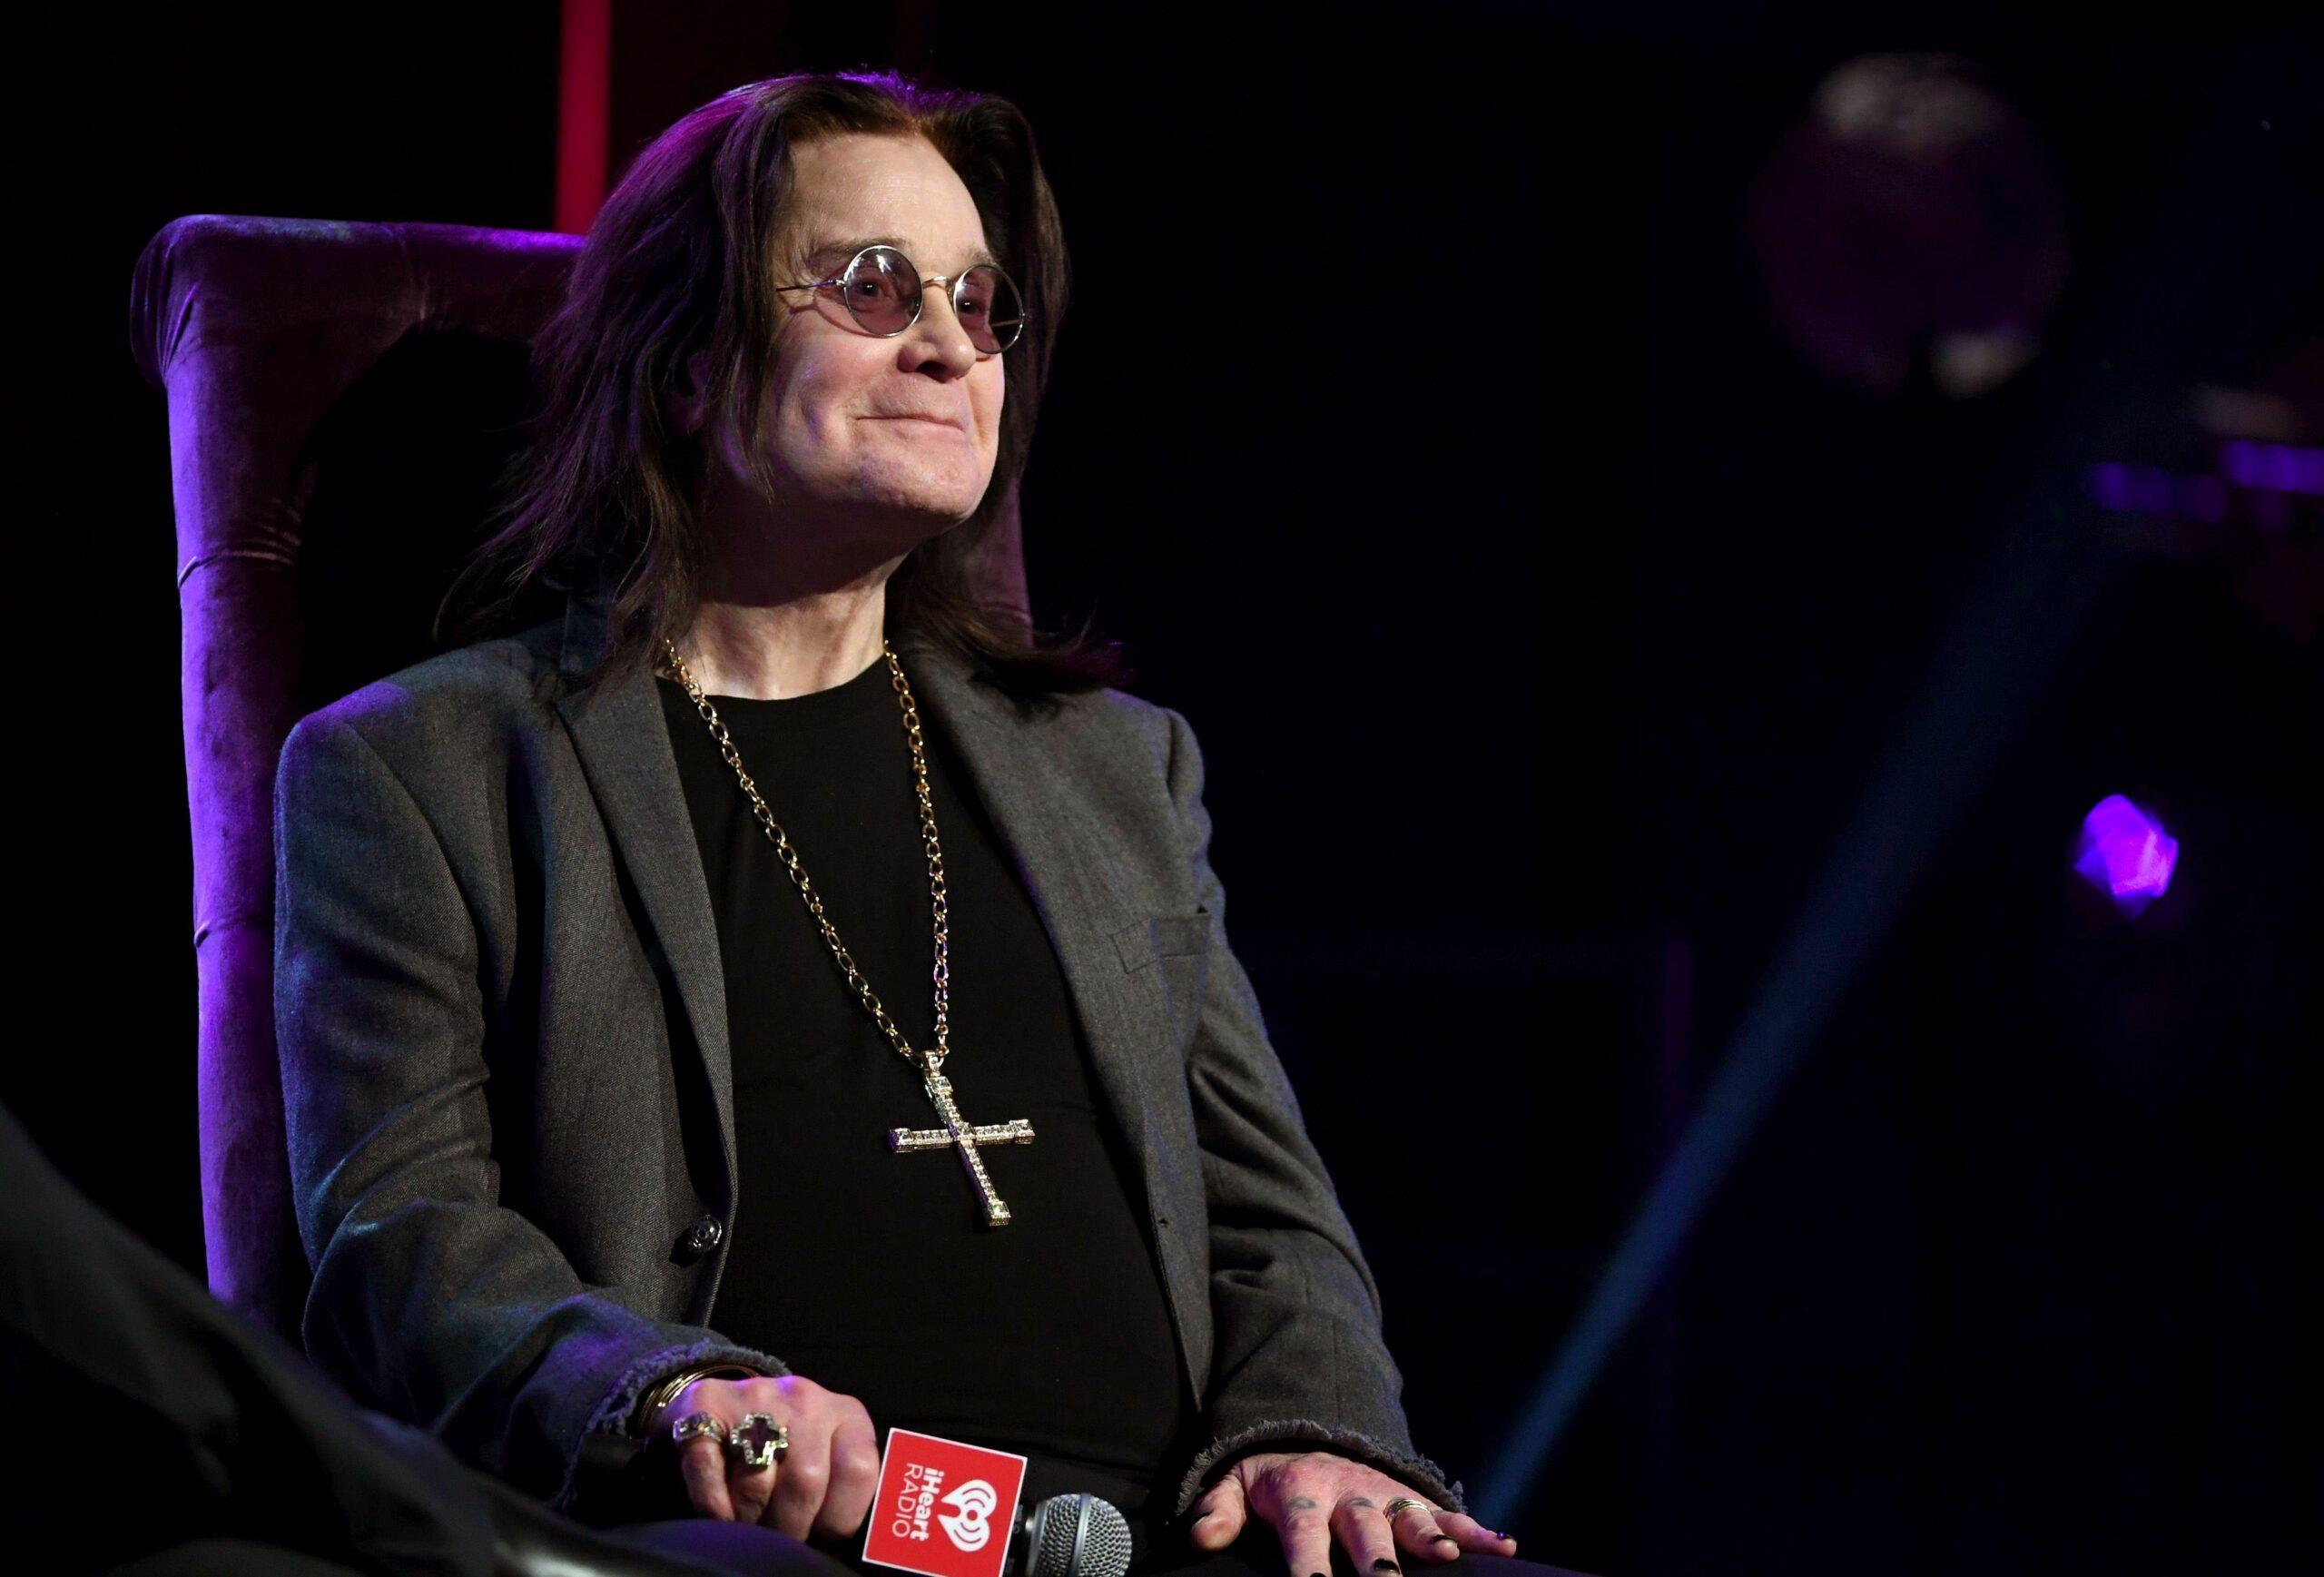 Ozzy Osbourne at iHeartRadio ICONS With Ozzy Osbourne: In Celebration Of Ordinary Man At The iHeartRadio Theater